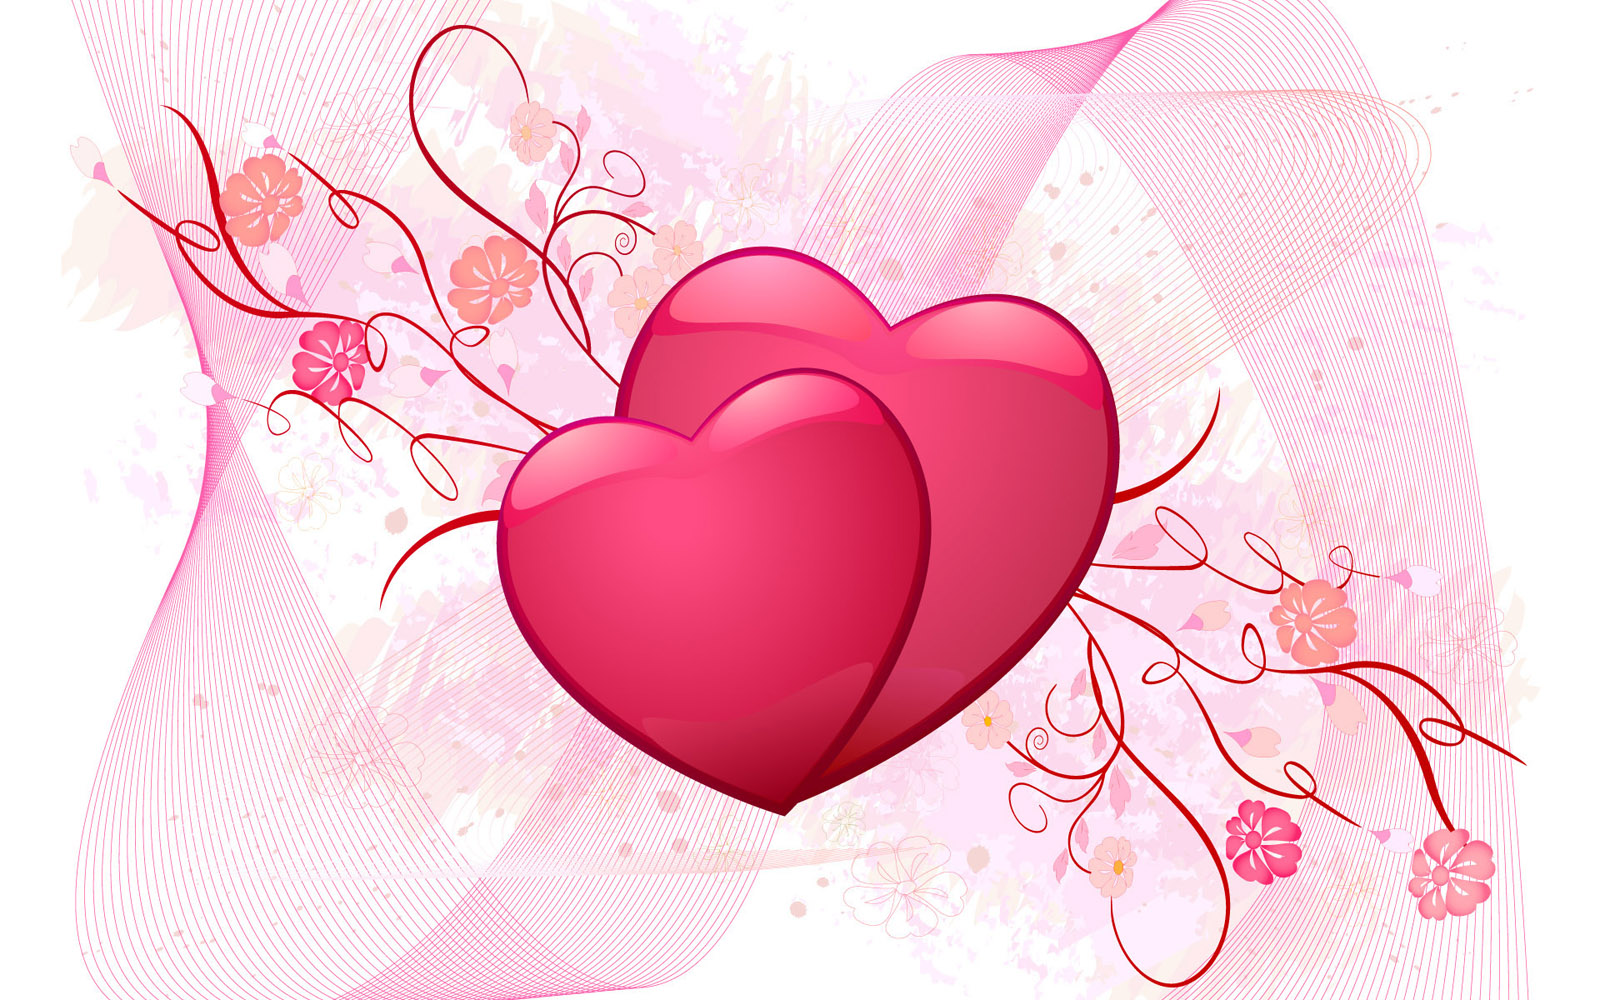 New Love Wallpaper Image Amp Pictures Becuo